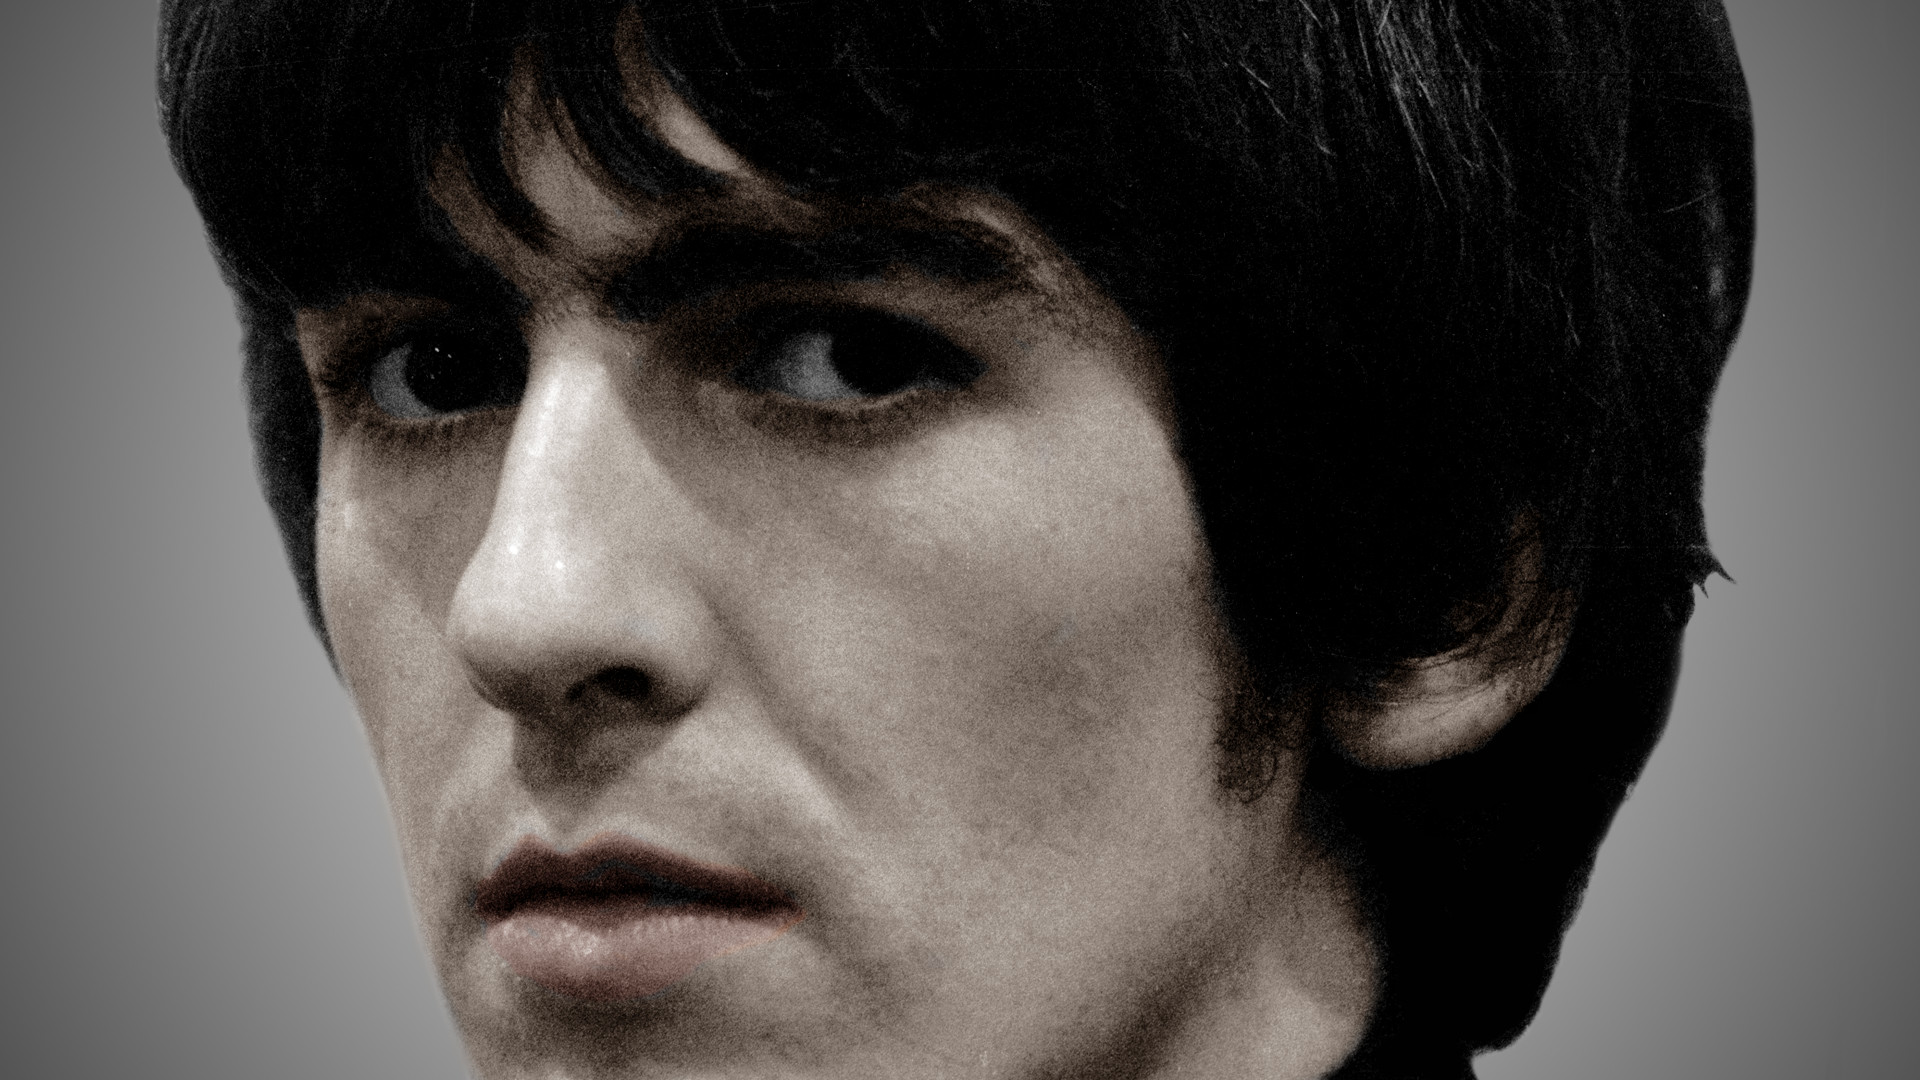 1920x1080 The Beatles images George Harrison wallpaper and background photos .